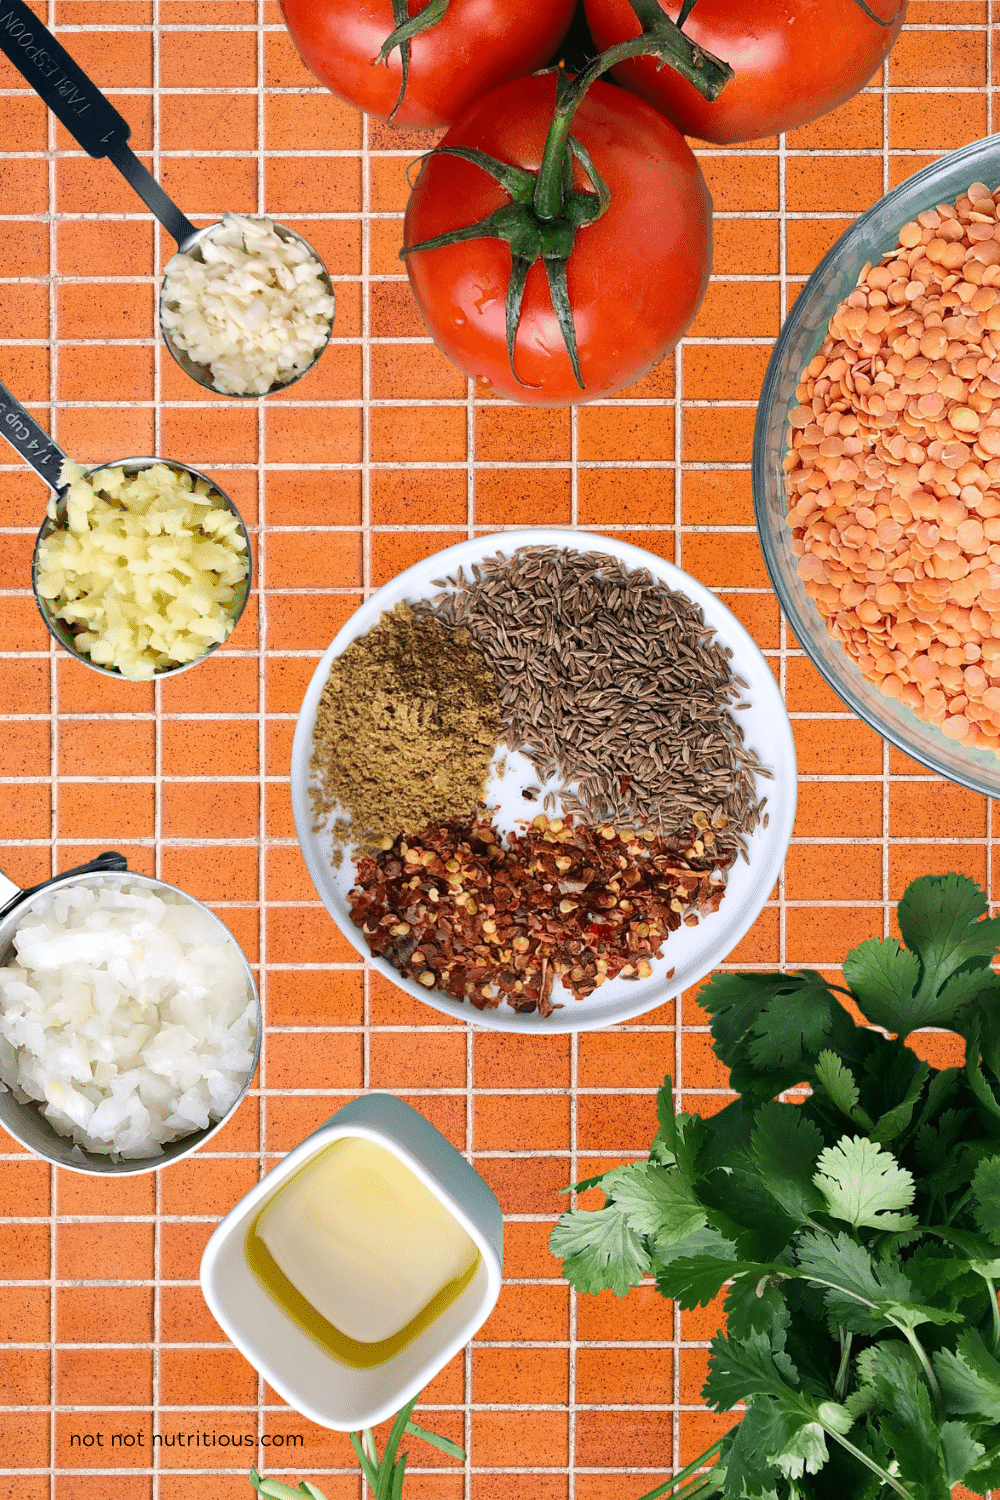 Ingredients for 1-Pot Indian Red Lentils (Dal), including tomatoe, red lentils, dried spices, cilantro, onion, garlic and ginger